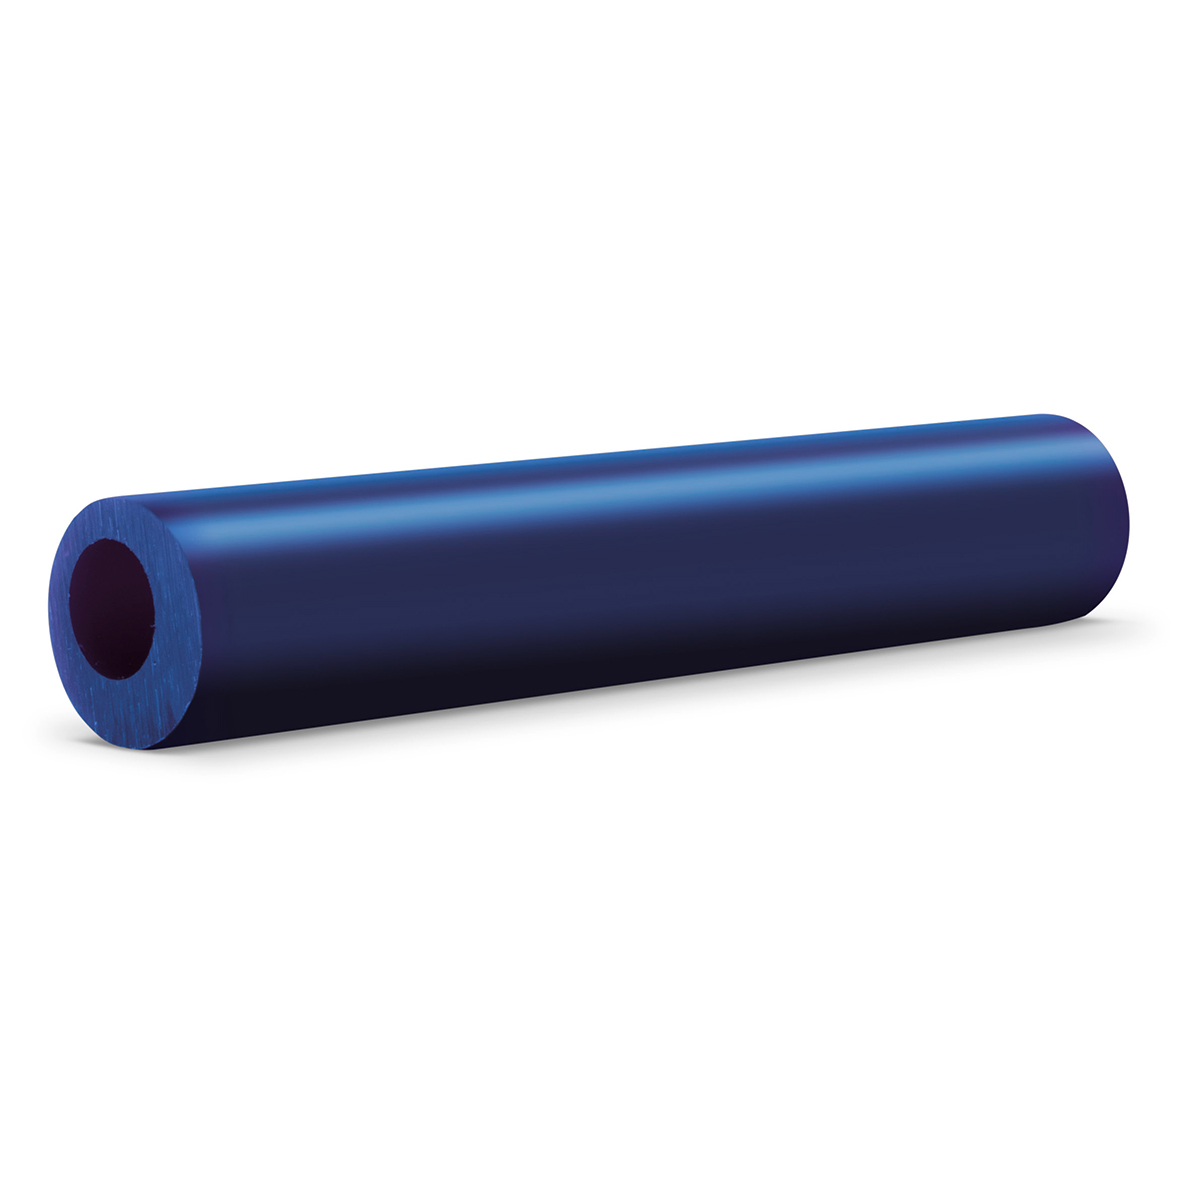 Carving wax tube, Ø 27 mm, off-center hole, blue, soft